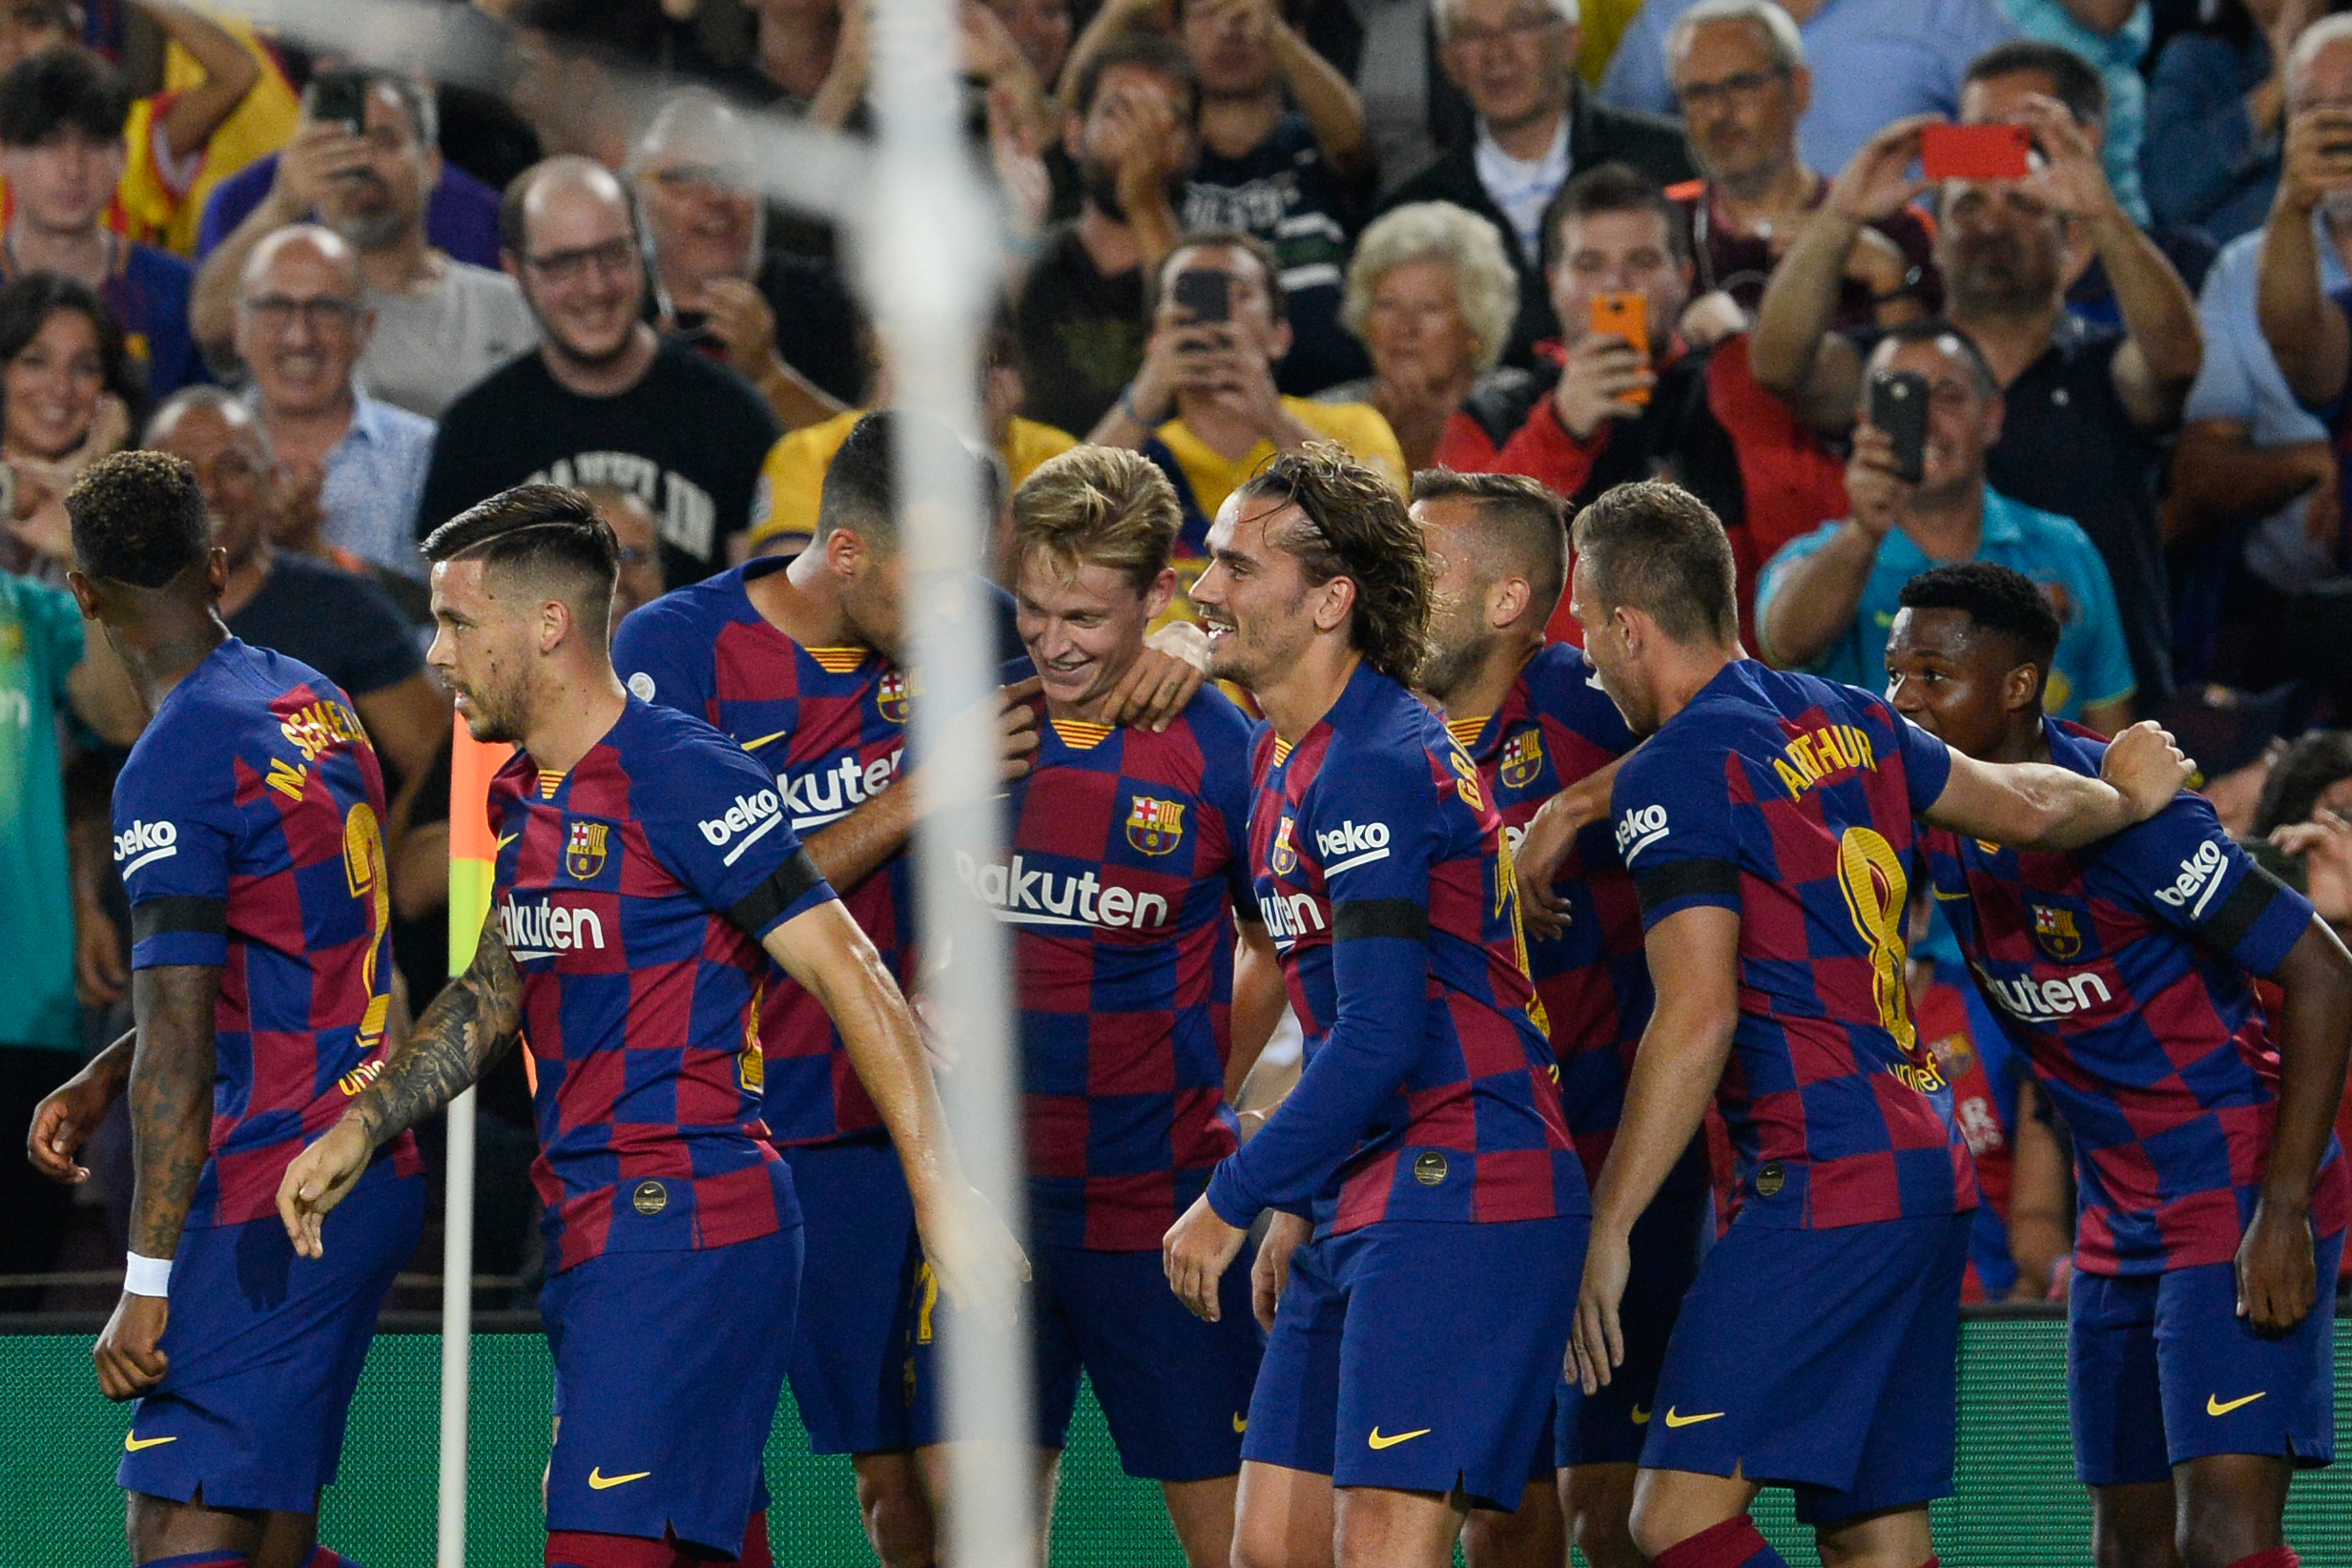 Barcelona's Dutch midfielder Frenkie De Jong (C) is congratulated by teammates after scoring a goal during the Spanish league football match FC Barcelona against Valencia CF at the Camp Nou stadium in Barcelona on September 14, 2019. (Photo by PAU BARRENA / AFP)        (Photo credit should read PAU BARRENA/AFP/Getty Images)